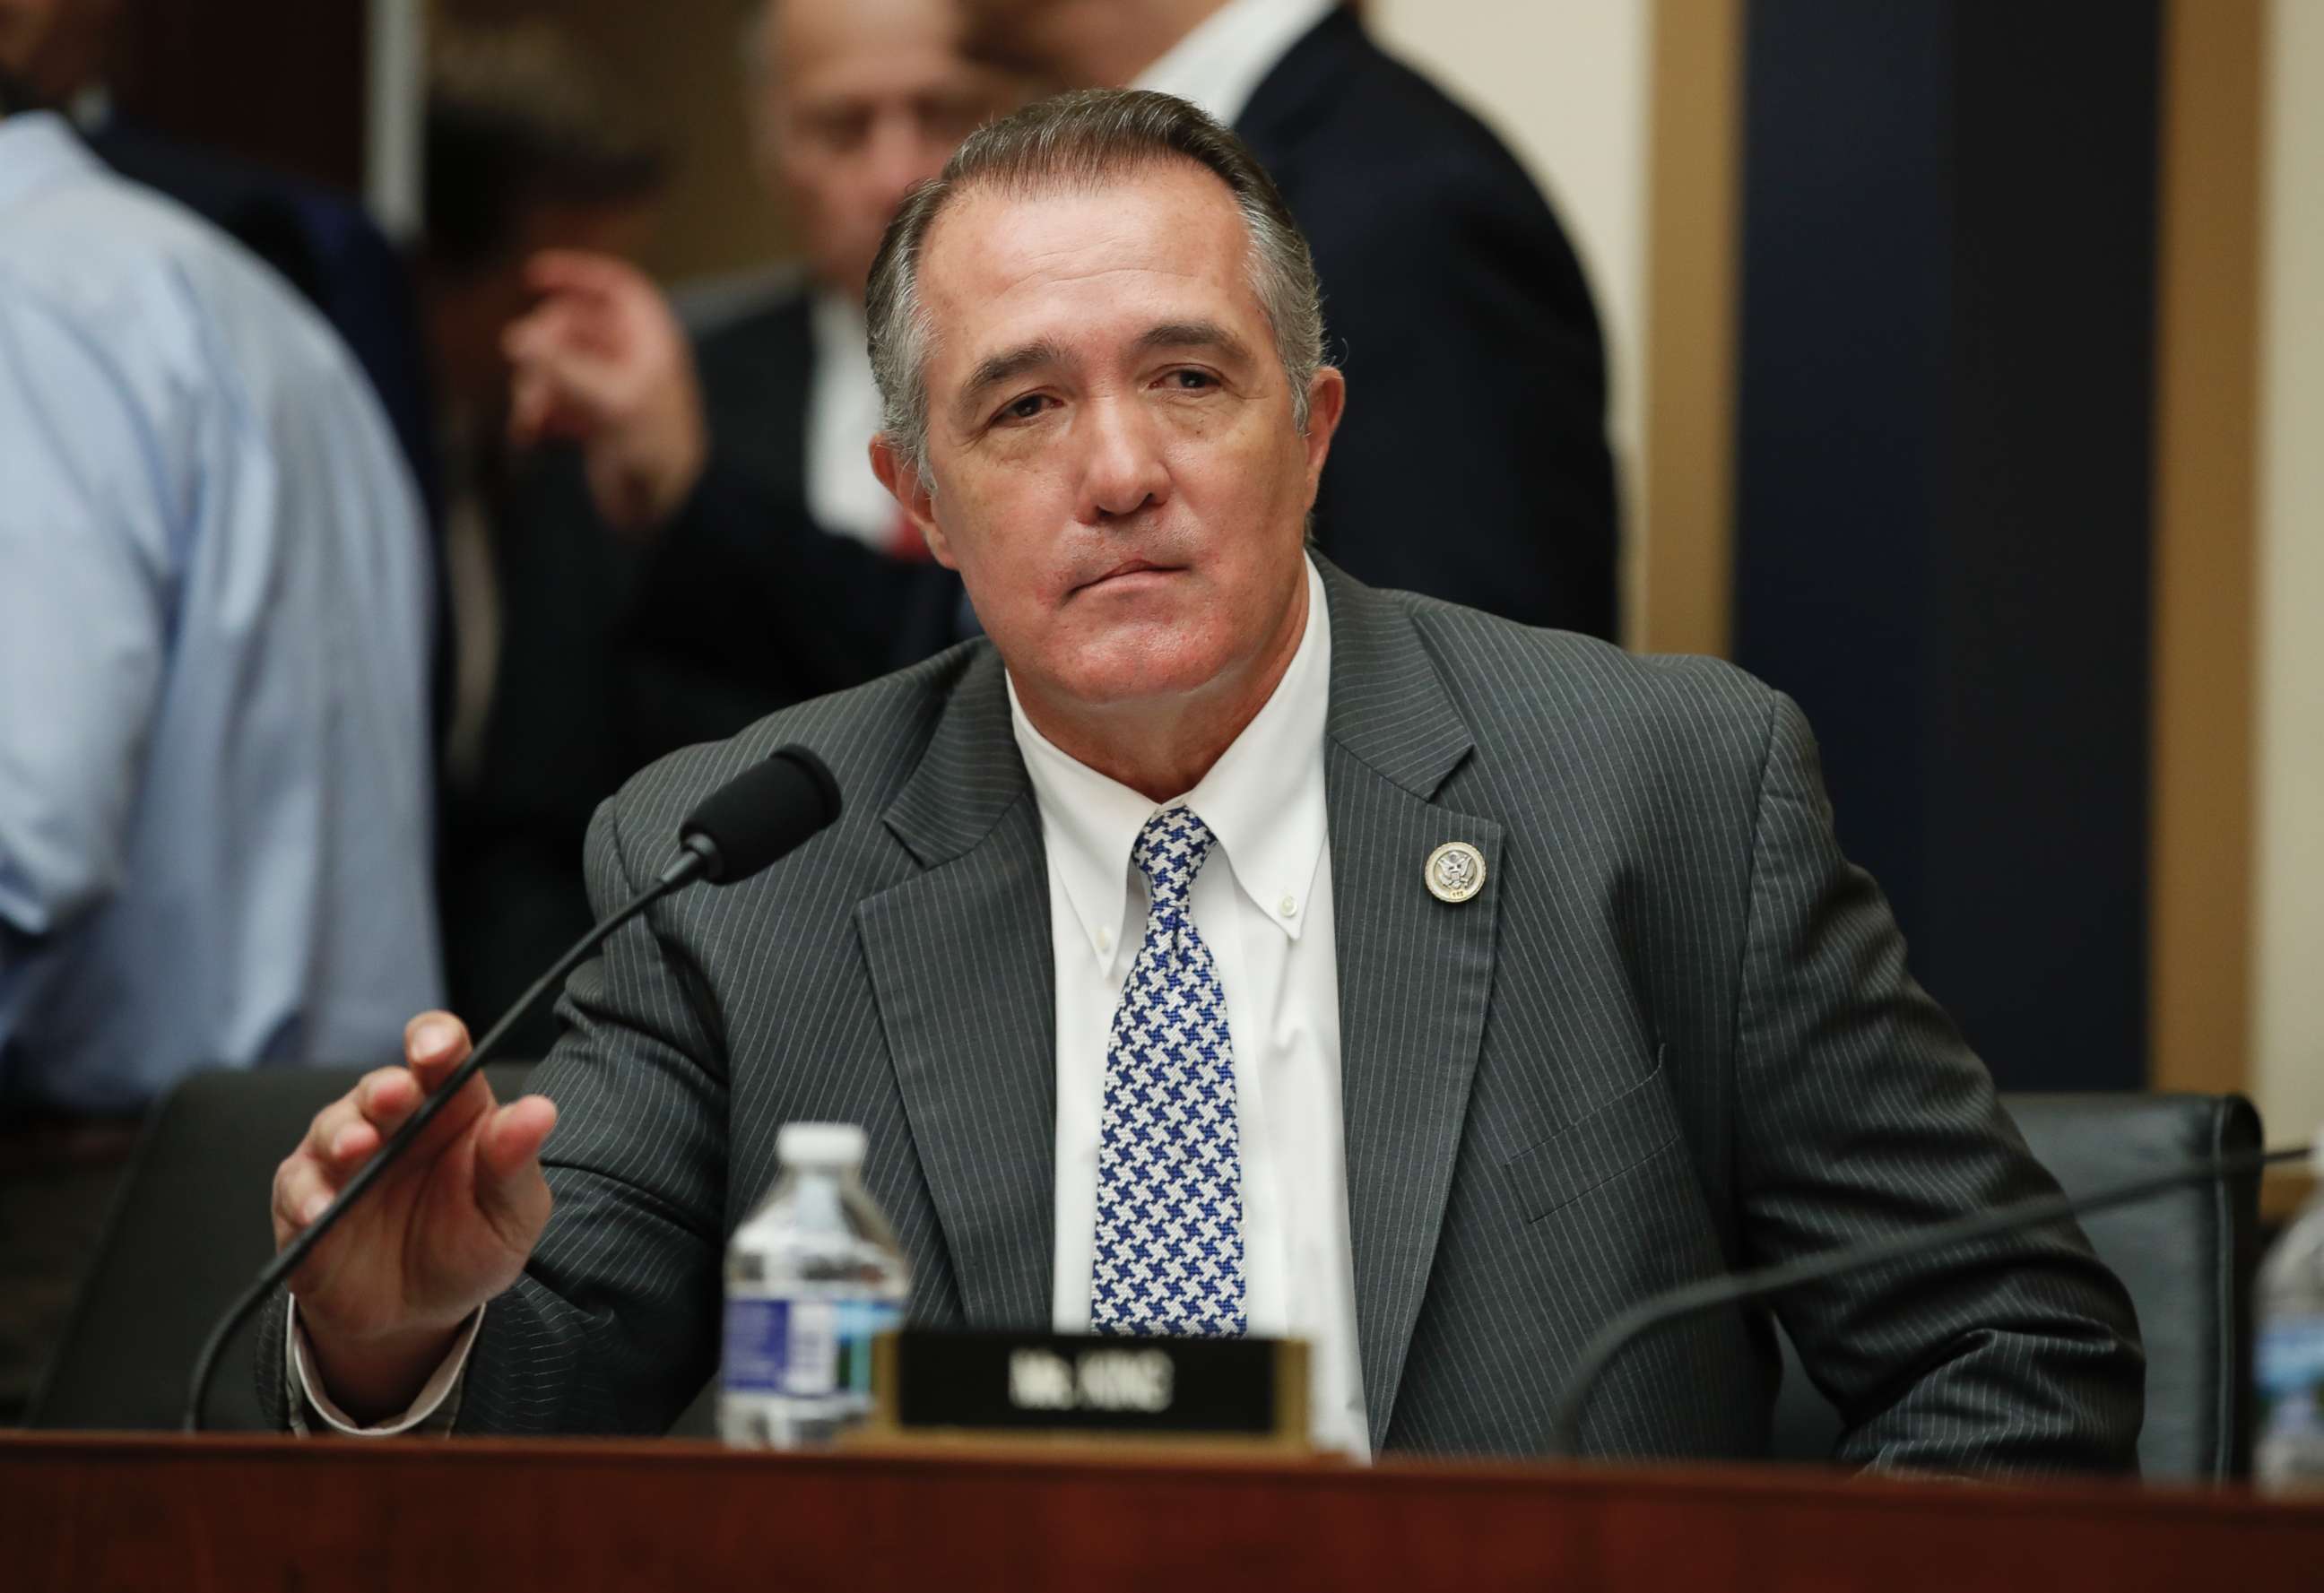 PHOTO: Rep. Trent Franks takes his seat before the start of a House Judiciary hearing on Capitol Hill in Washington, Dec. 7, 2017.